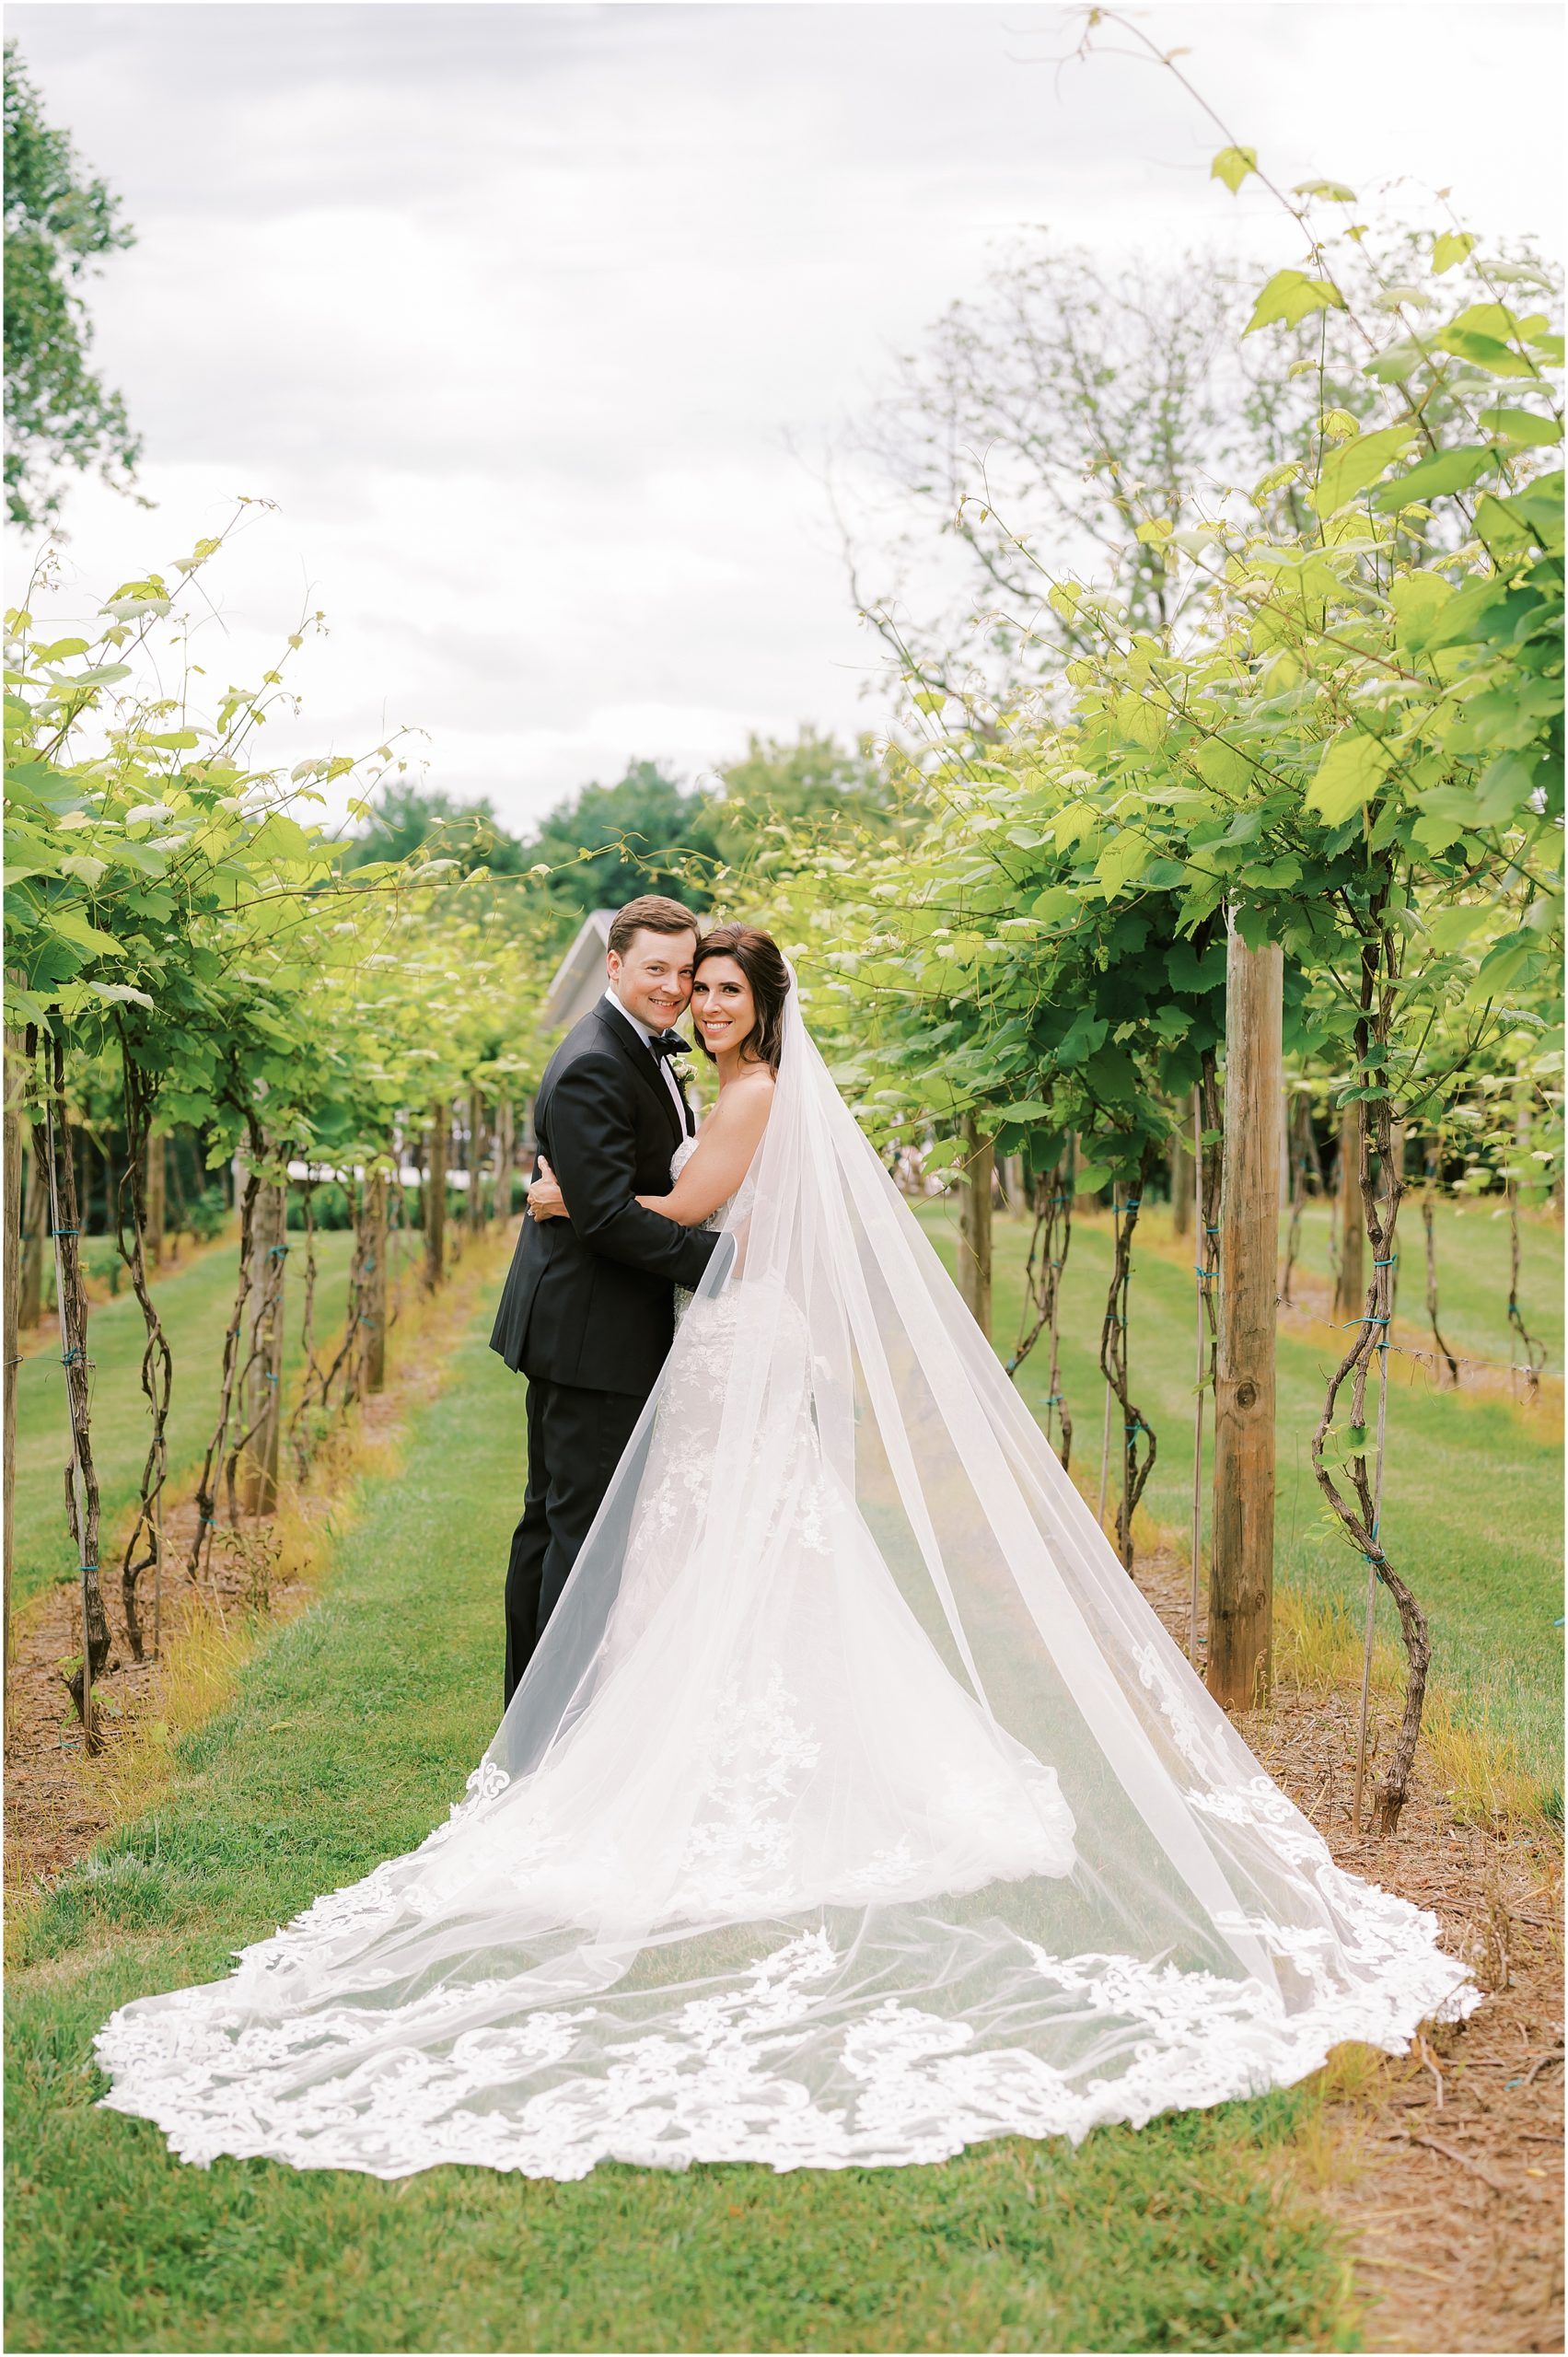 Bride and groom portrait at their wedding at Fleetwood Farm Winery in Leesburg, VA